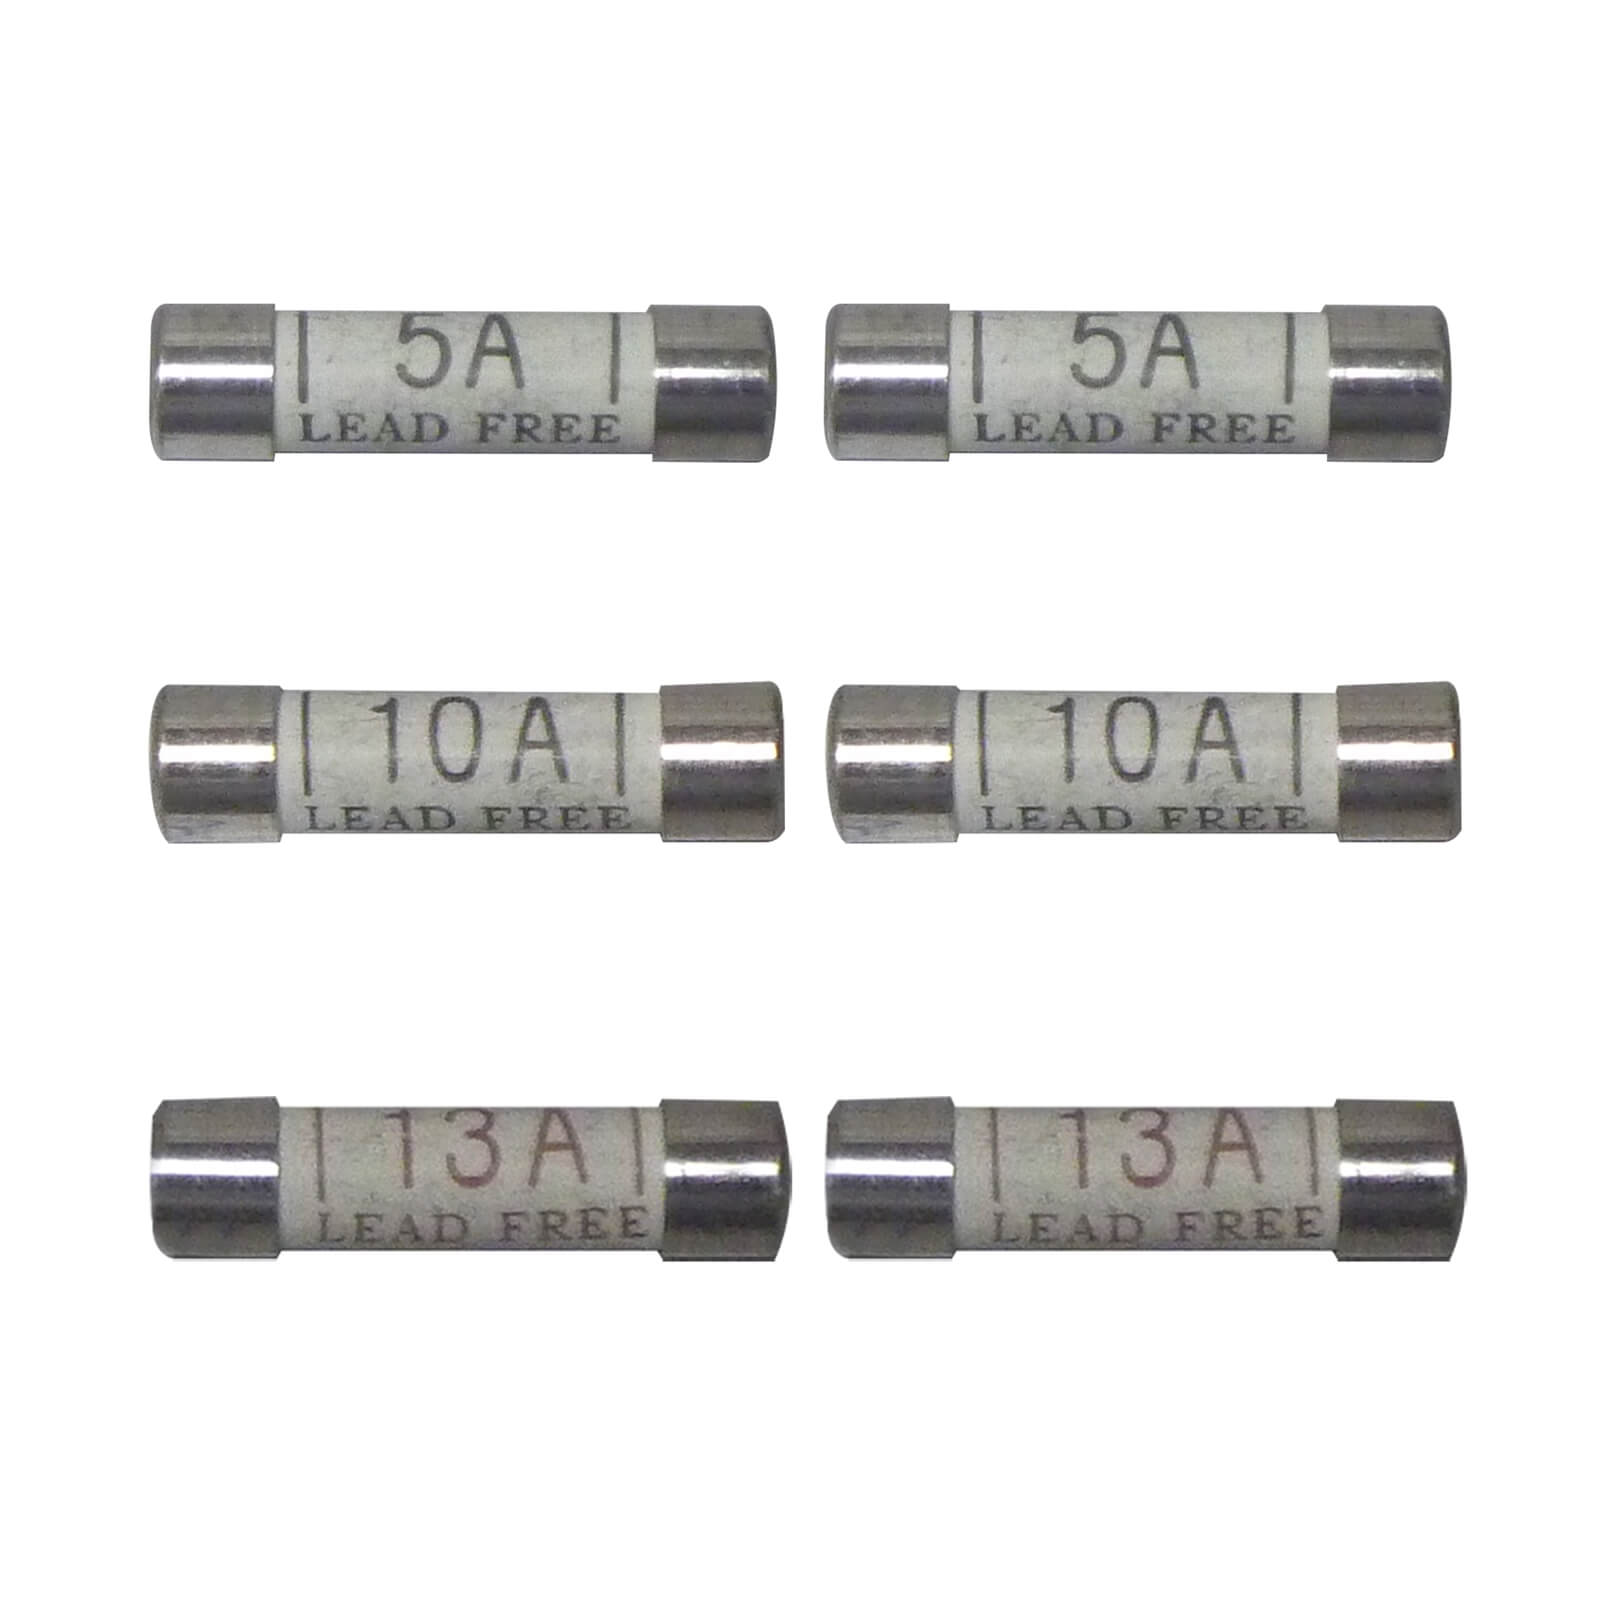 Photo of Arlec Mixed Amp Fuse 5a- 10a- 13a 6 Pack